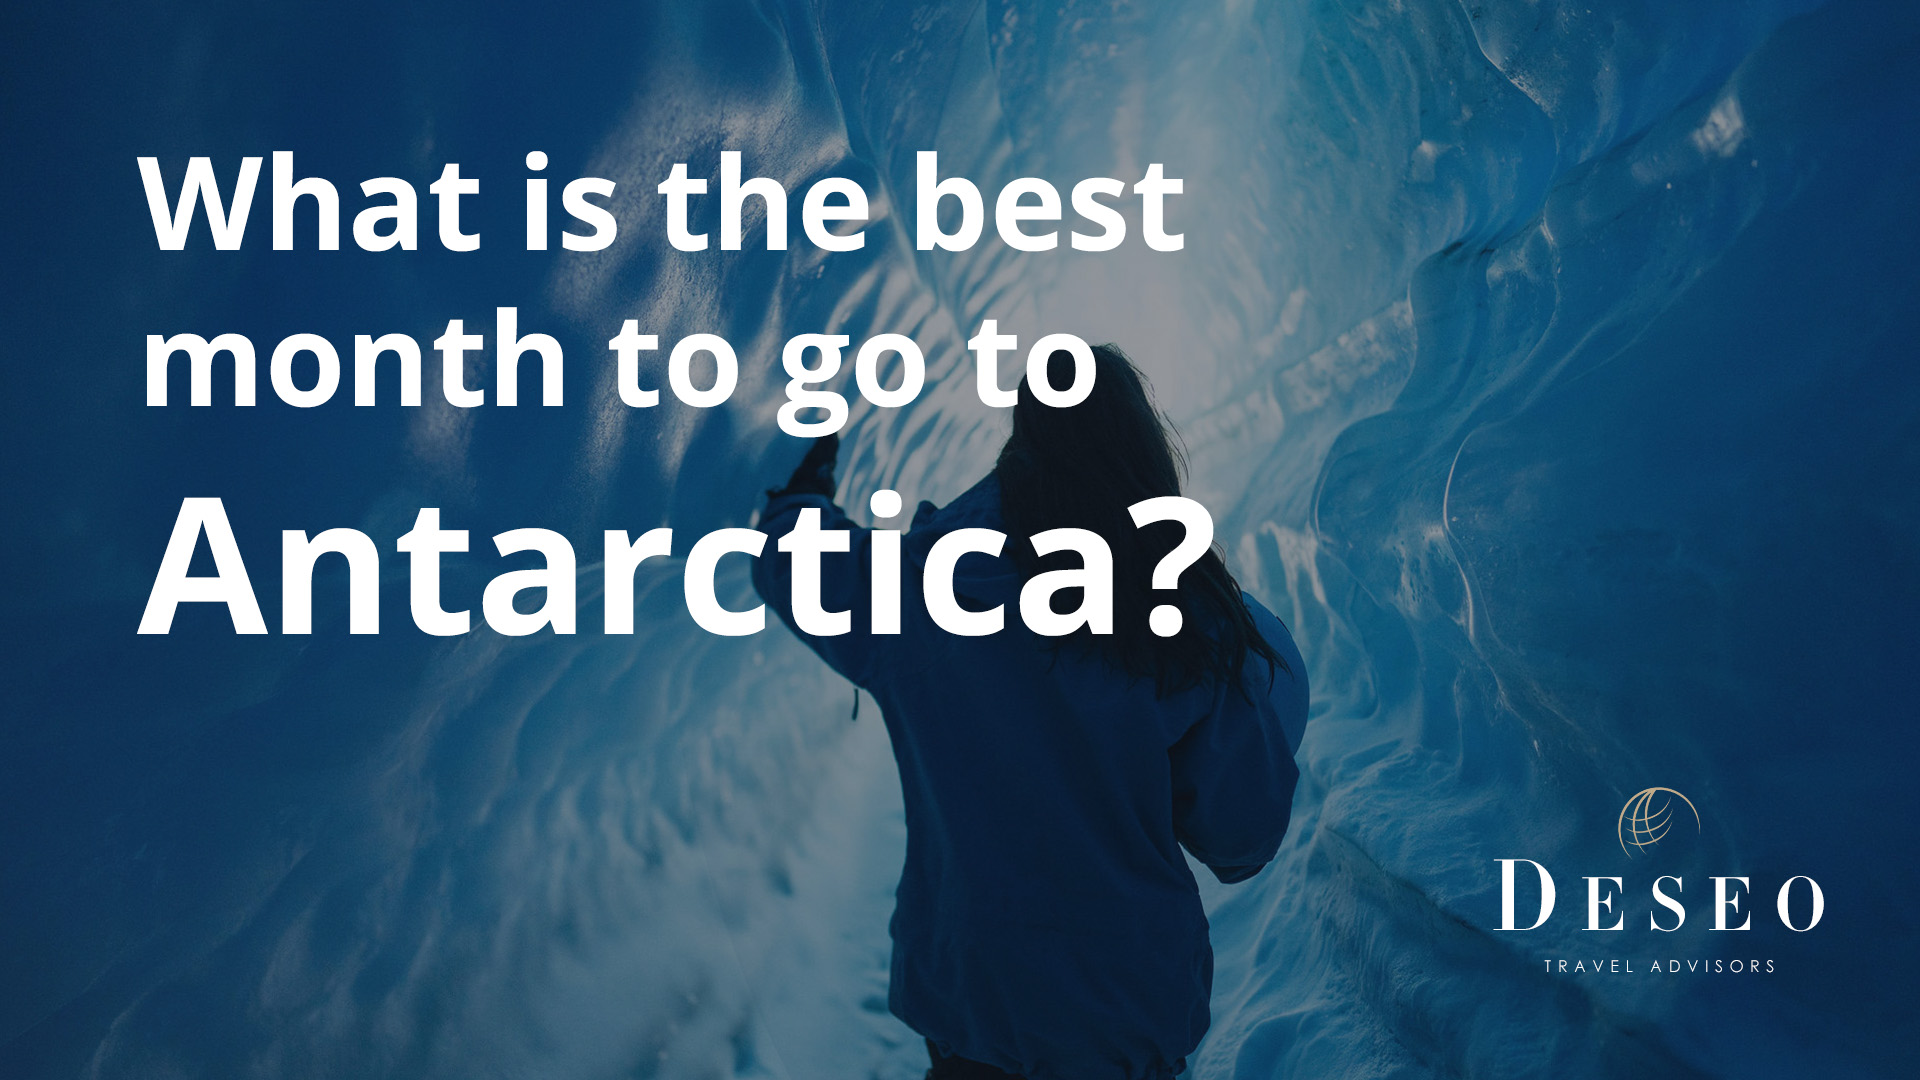 What is the best month to go to Antarctica?